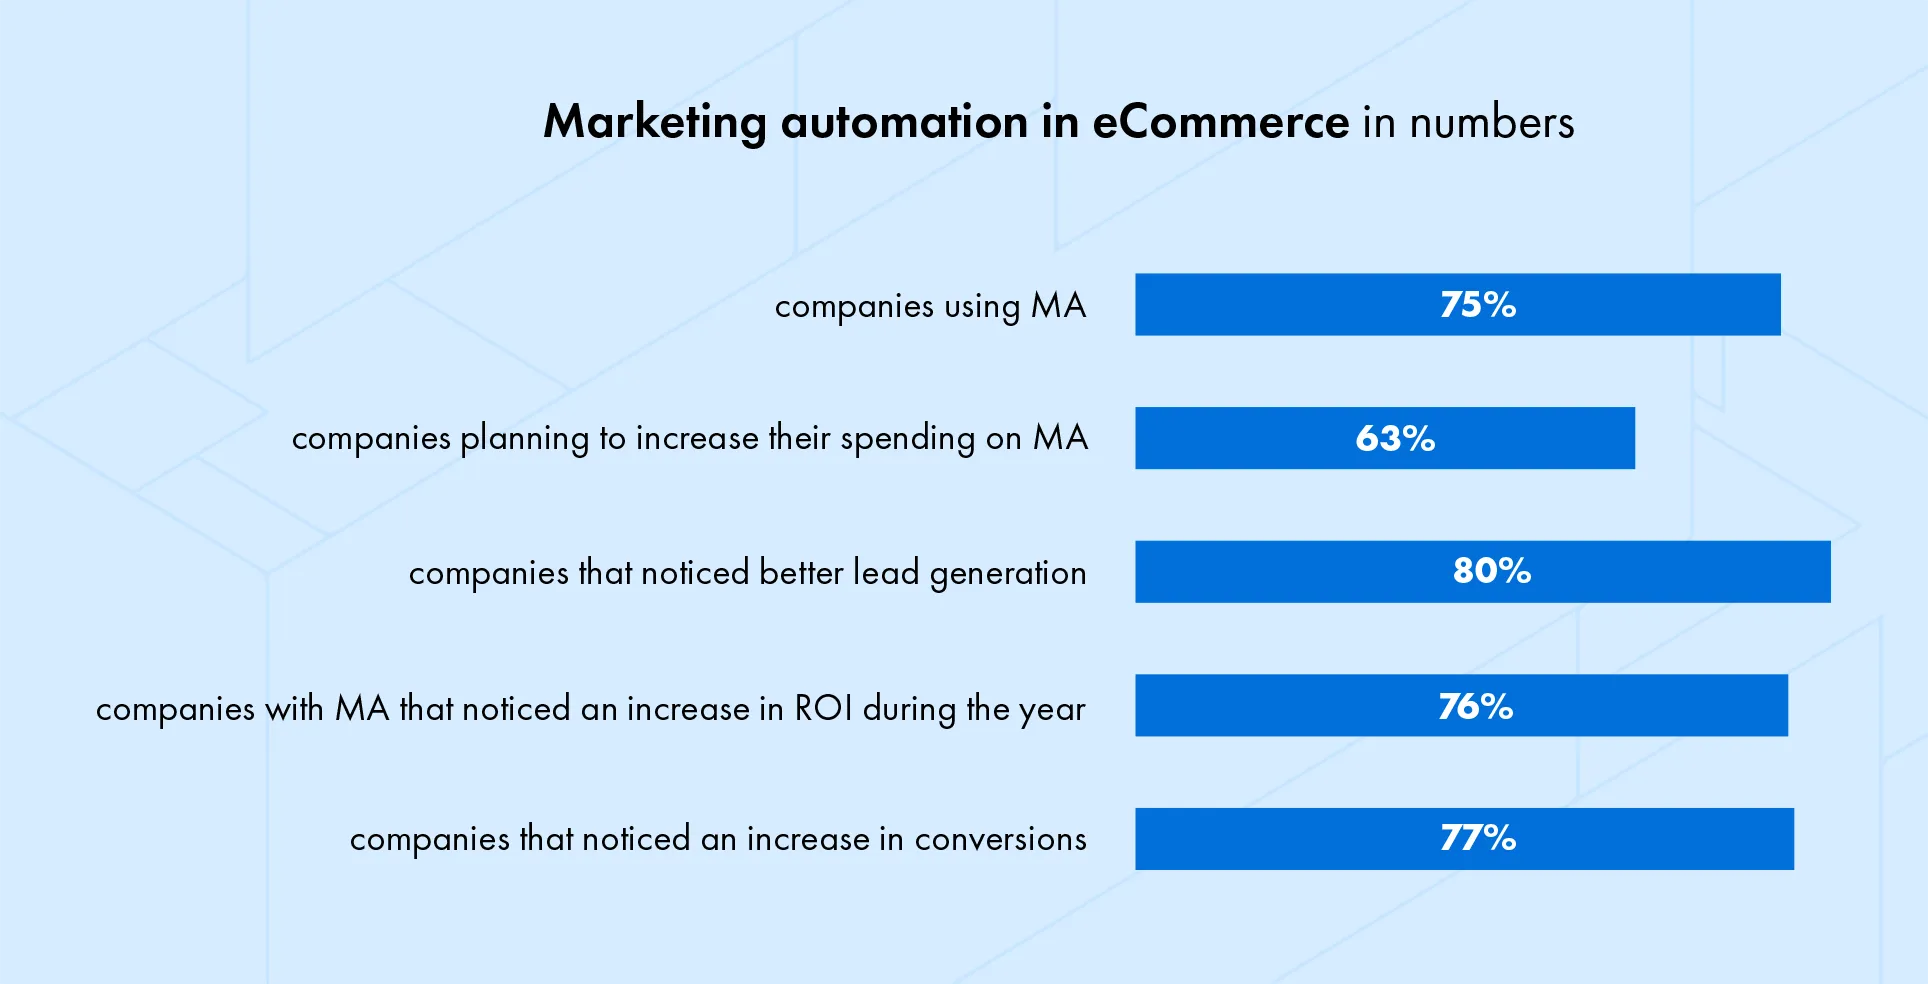 Marketing automation in numbers